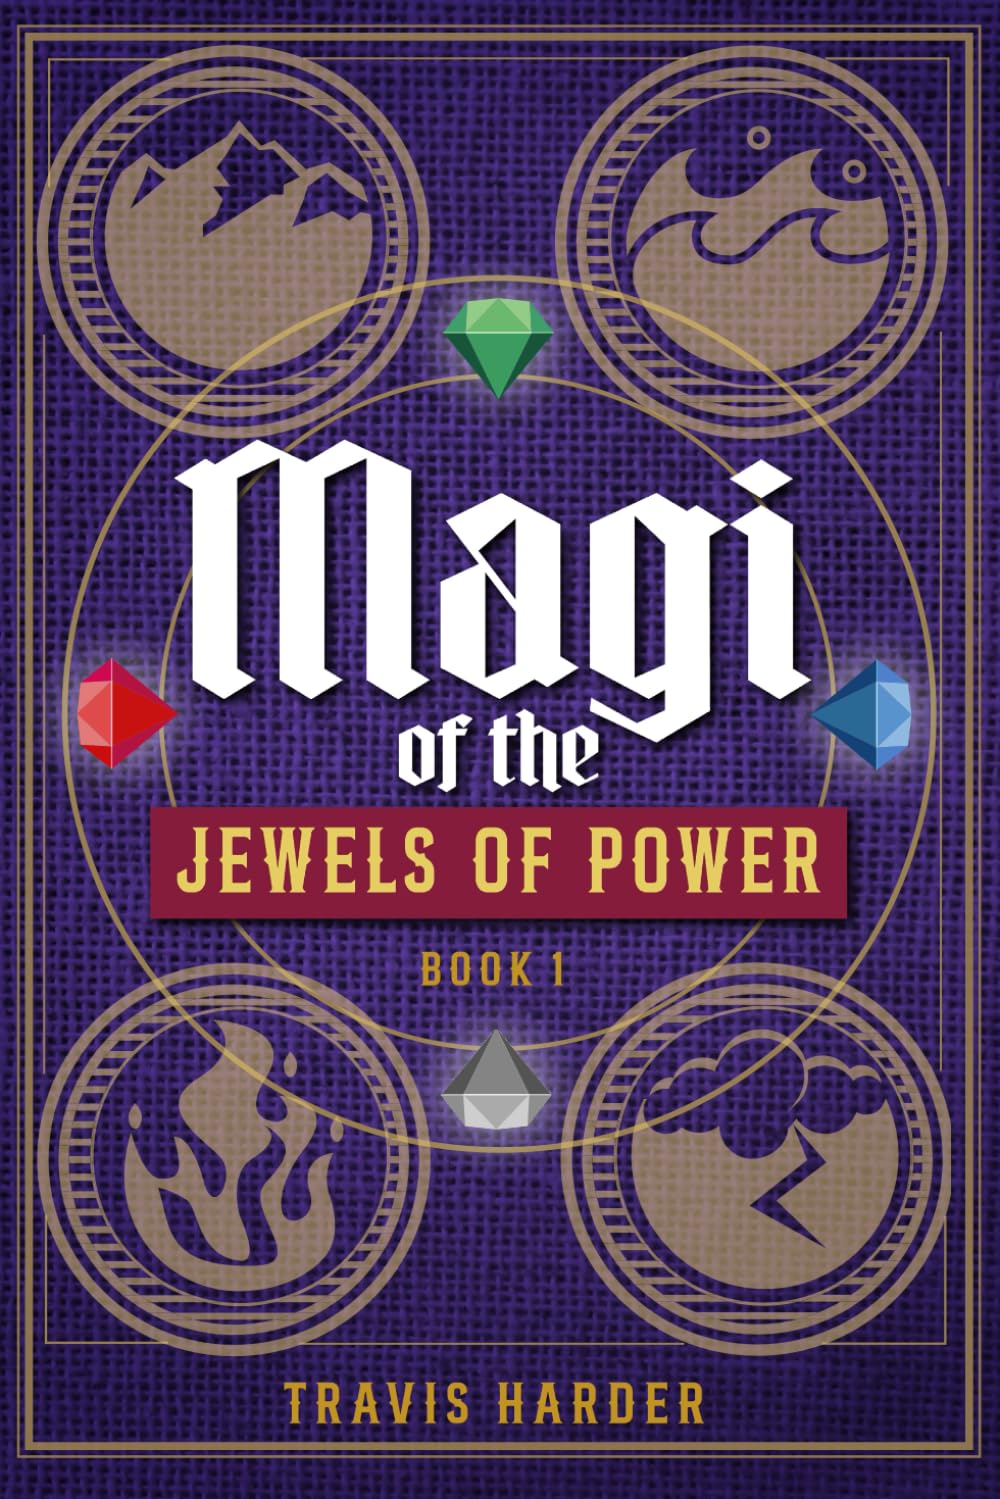 Picture of front cover of the book Magi of the Jewels of power: Book 1